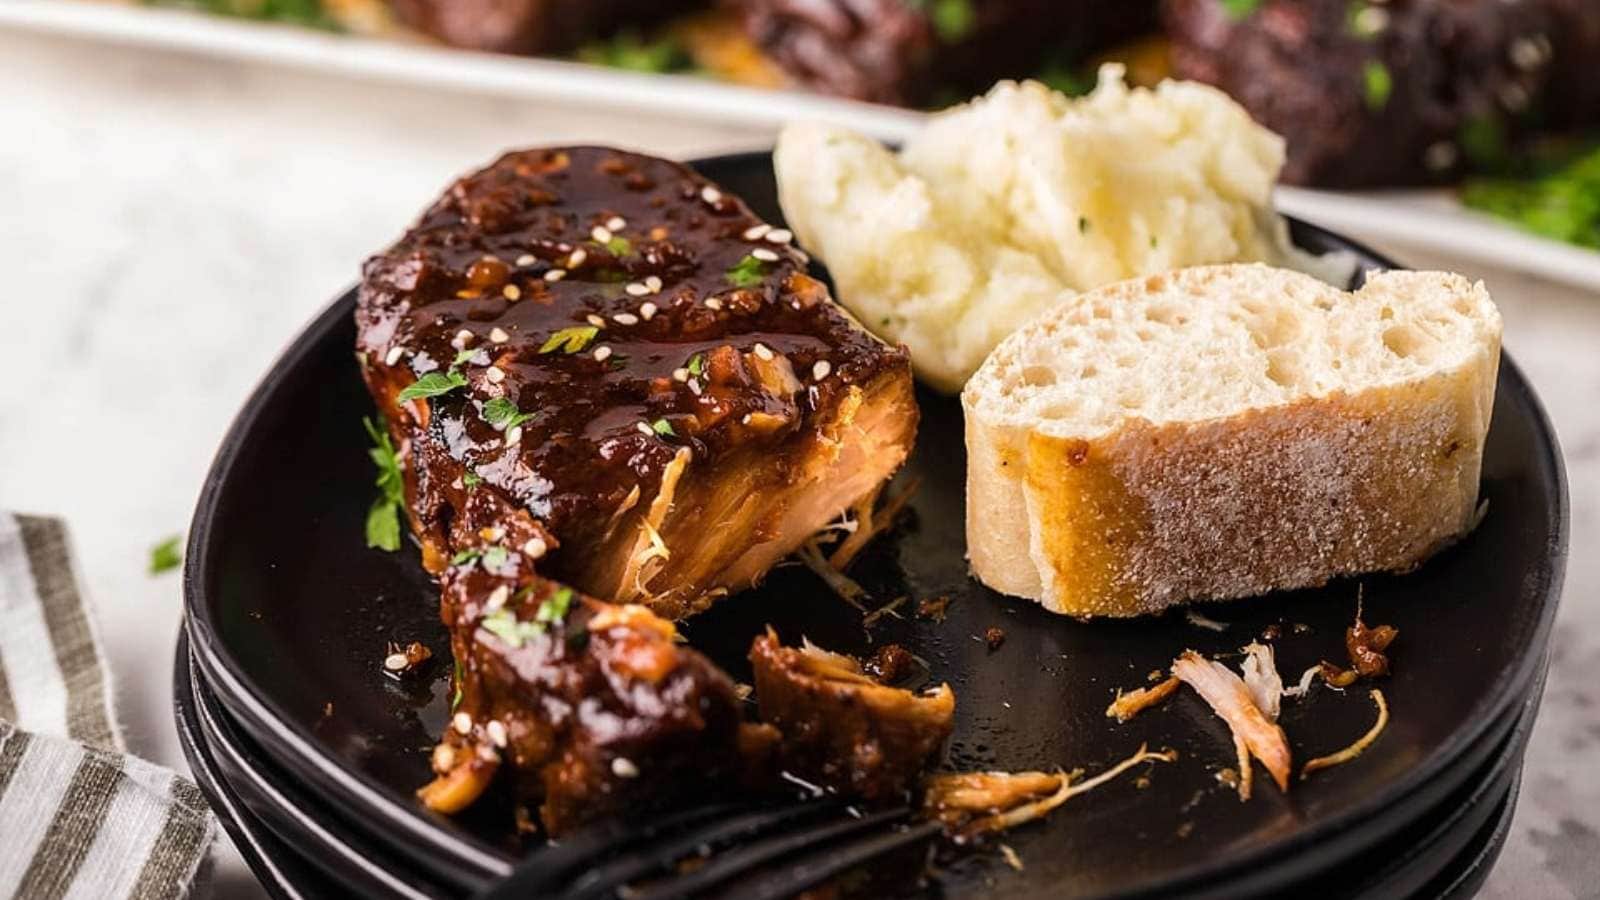 Bbq ribs on a black plate with bread.